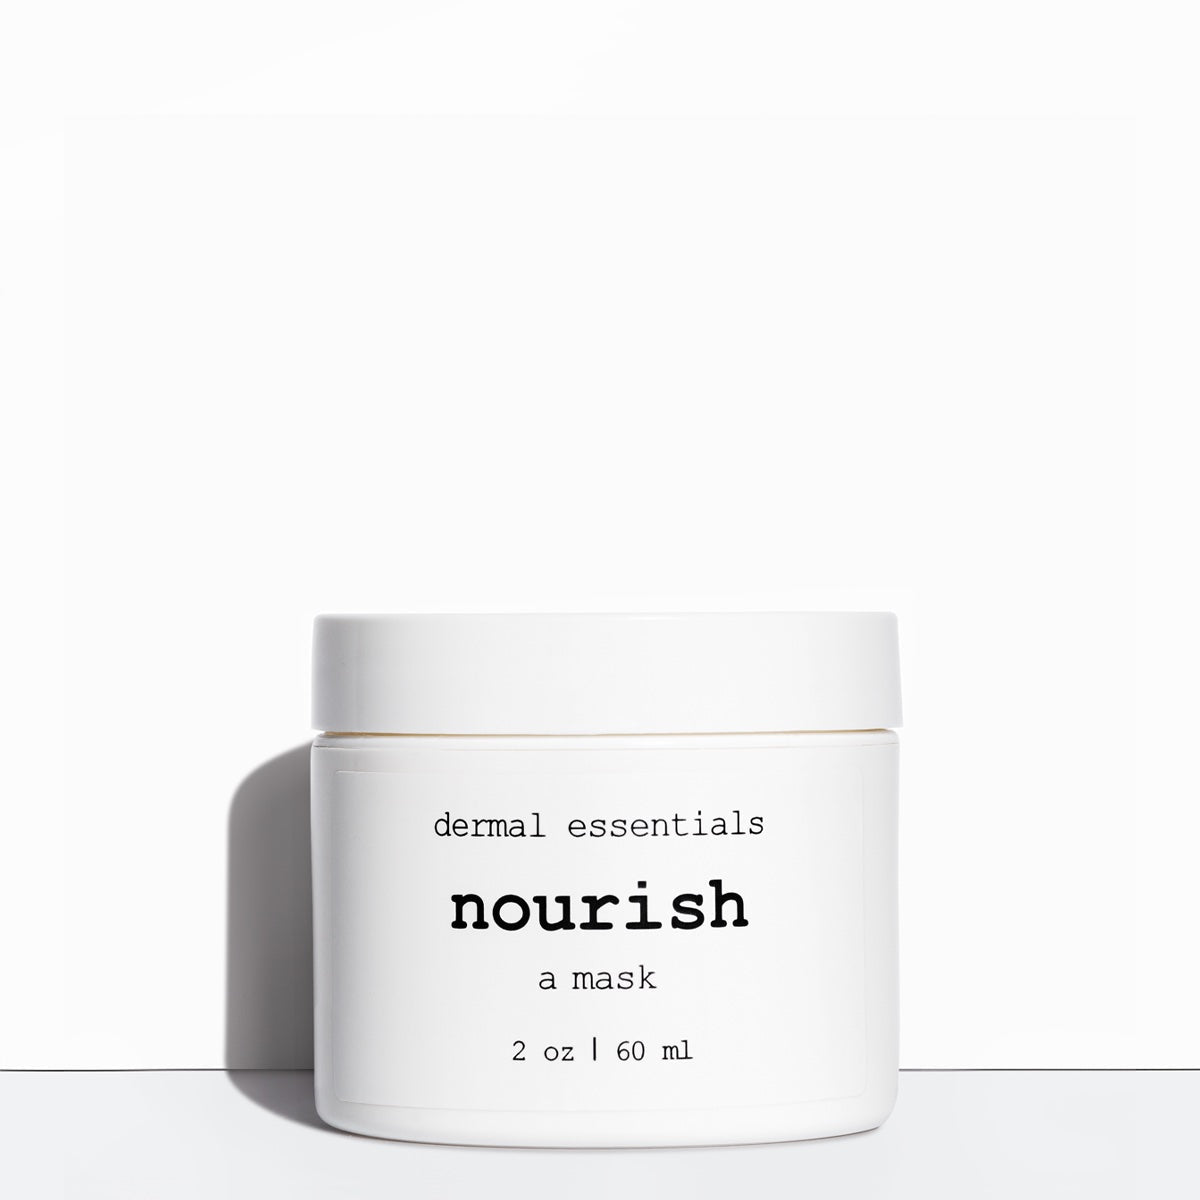 Fulll size is 2 oz. White round plastic jar black letters white round plastic twist lid. Nourish is a facial mask hydrating hyaluronic acid shea butter Dermal Essentials Medical Grade Skincare . A mini size is 5 ml of this hyaluronic facial mask skincare product in a round clear plastic jar white label with black letters white screw lid.